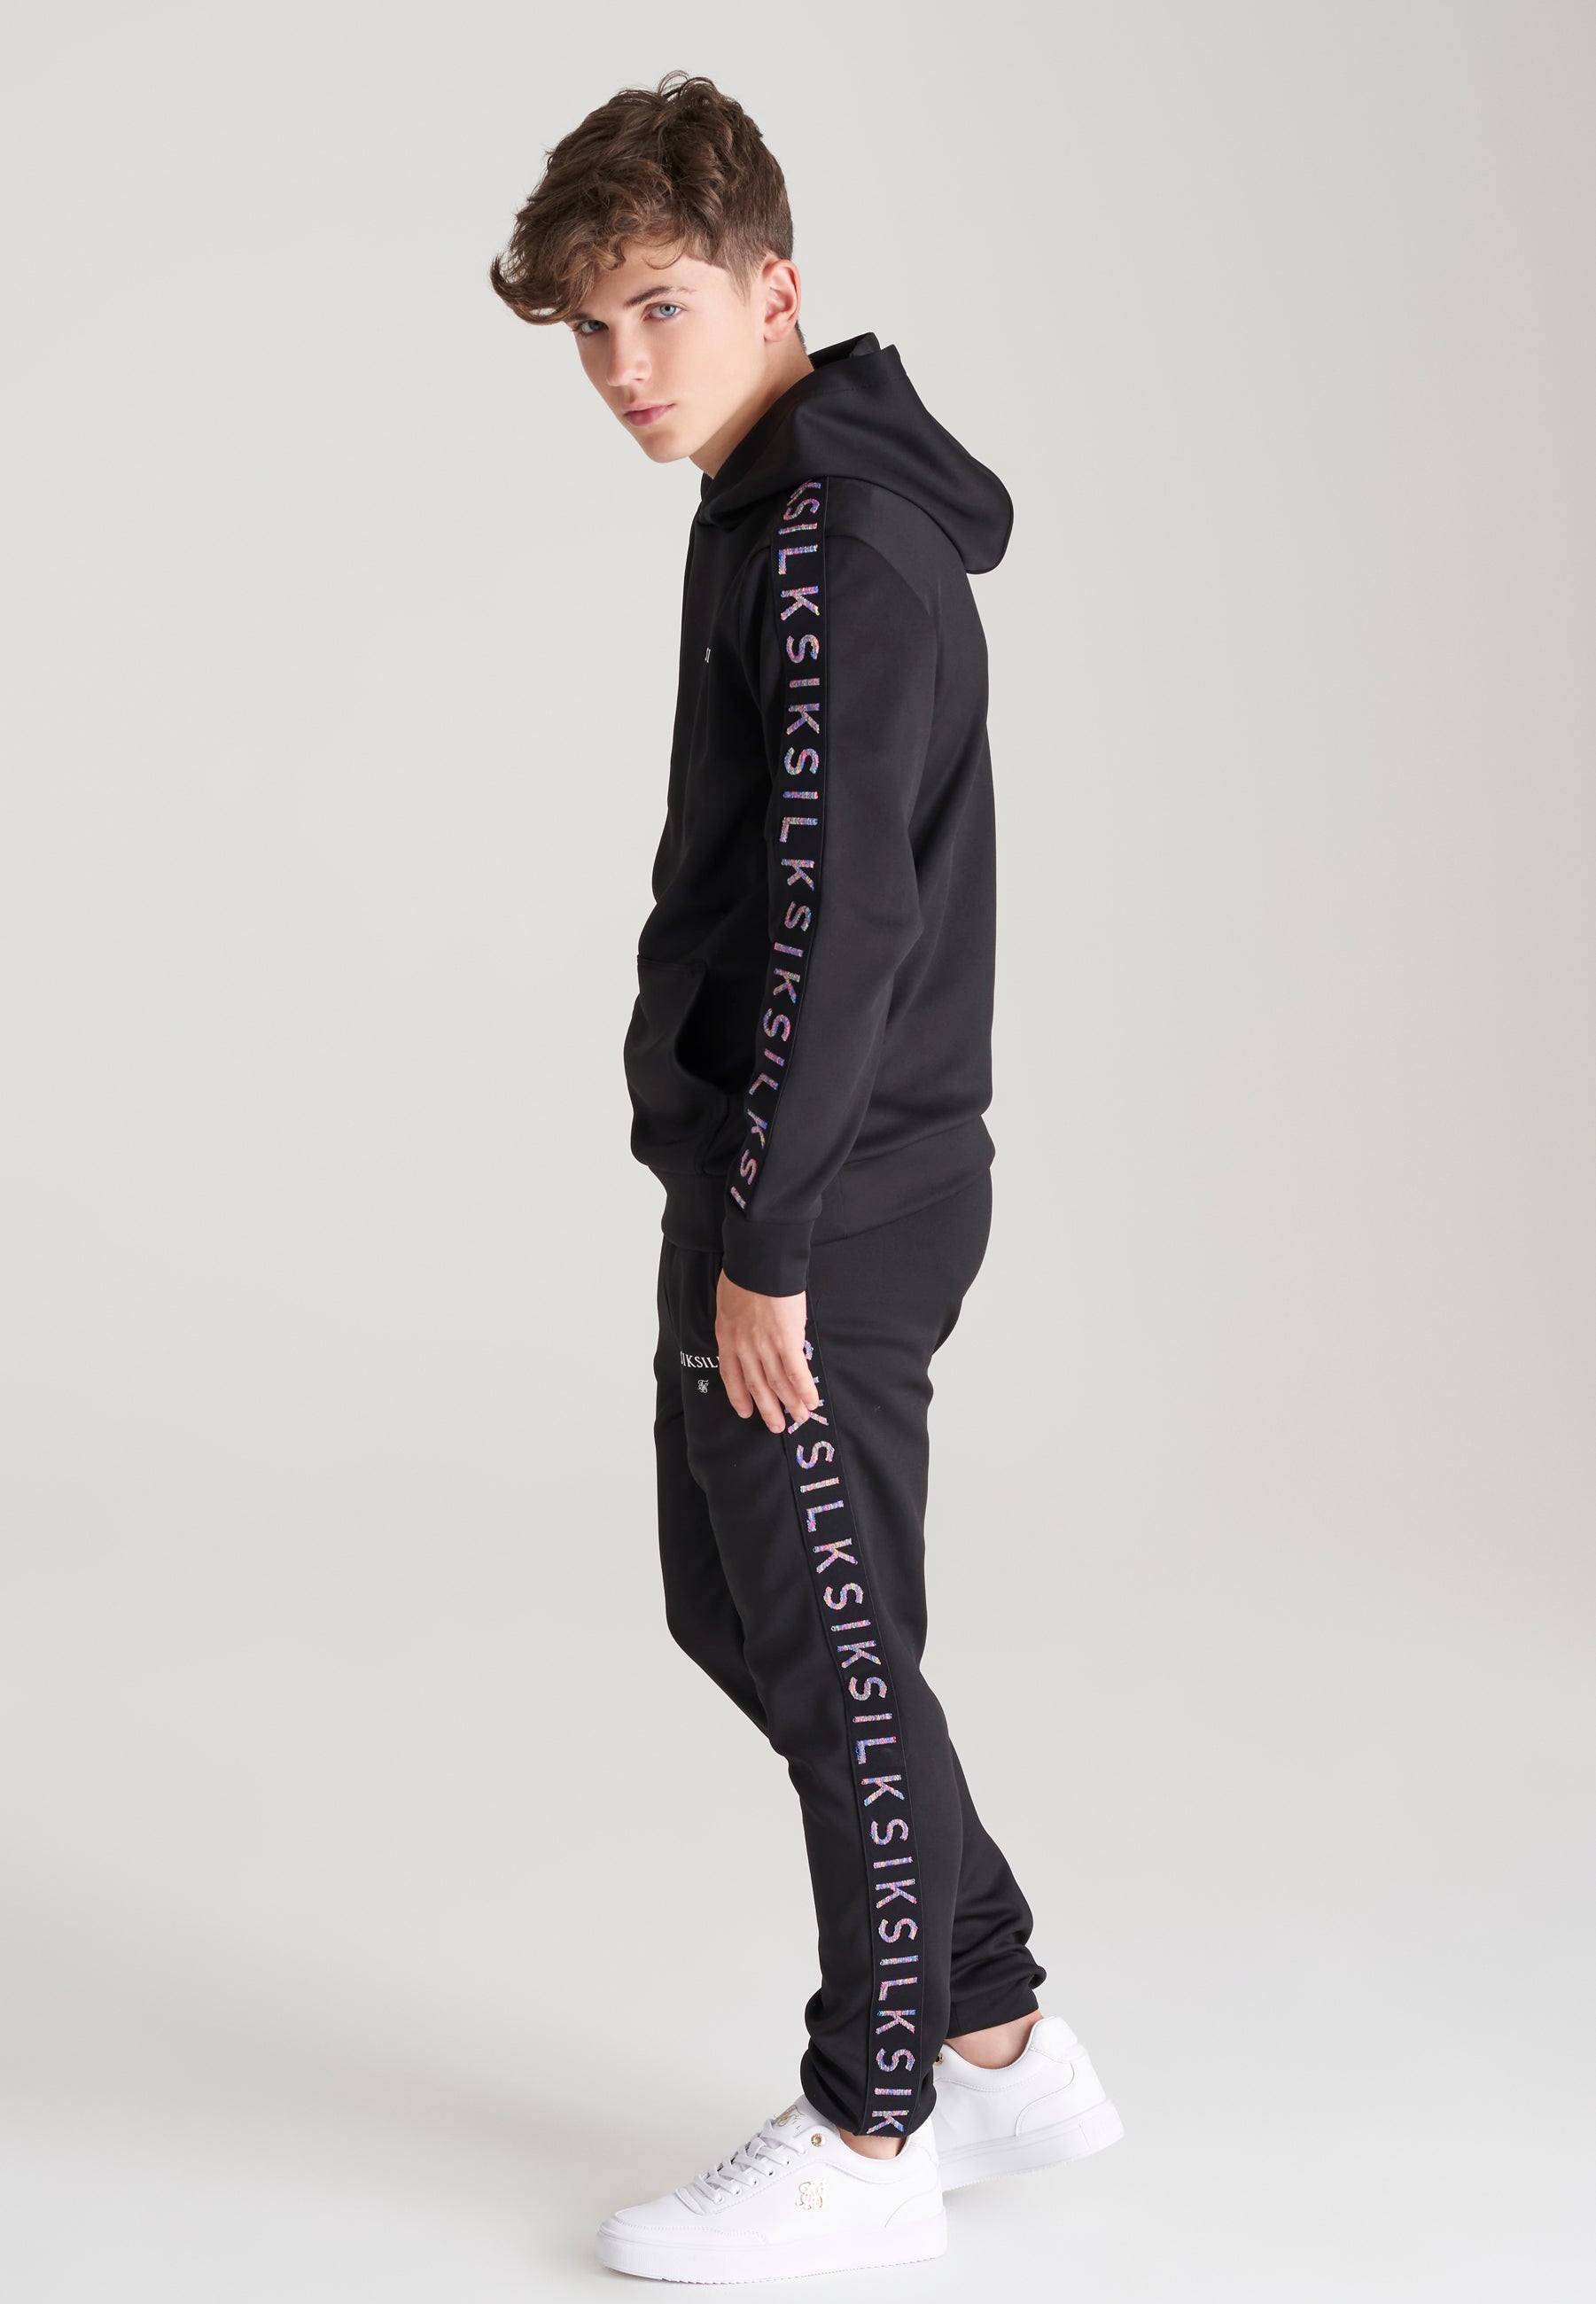 Load image into Gallery viewer, Boys Black Taped Overhead Hoodie (3)